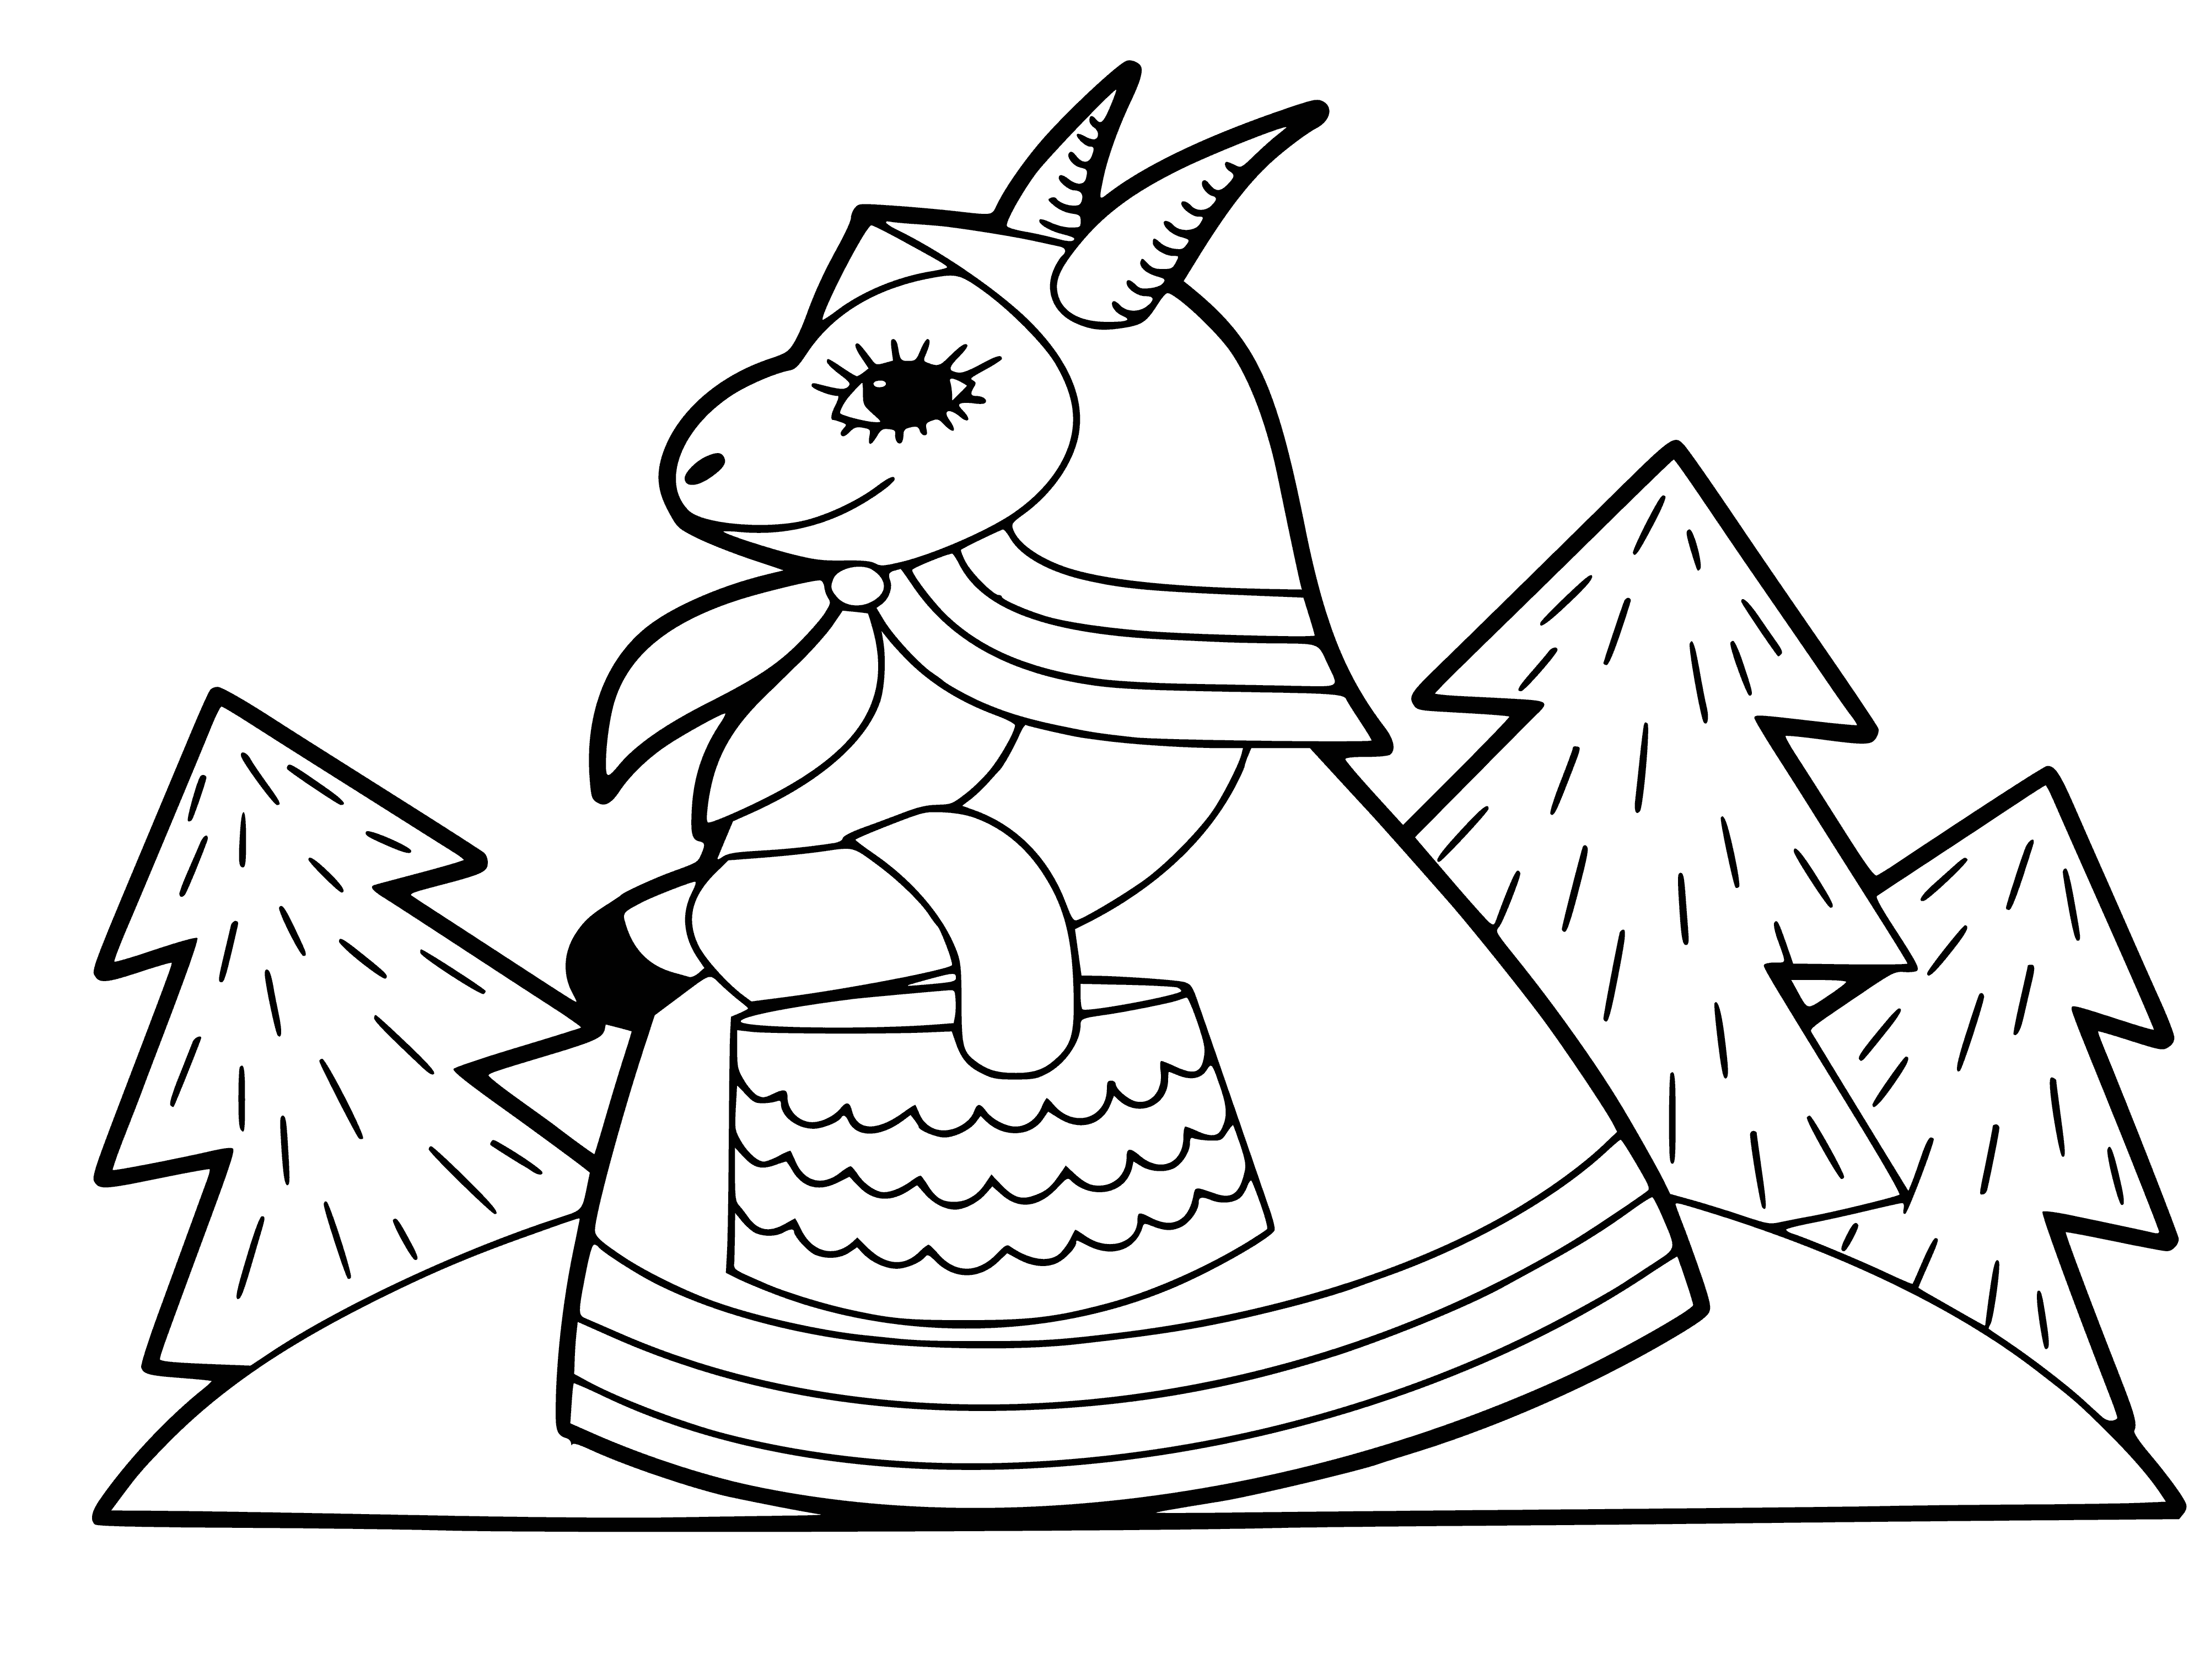 Goat from a fairy tale coloring page